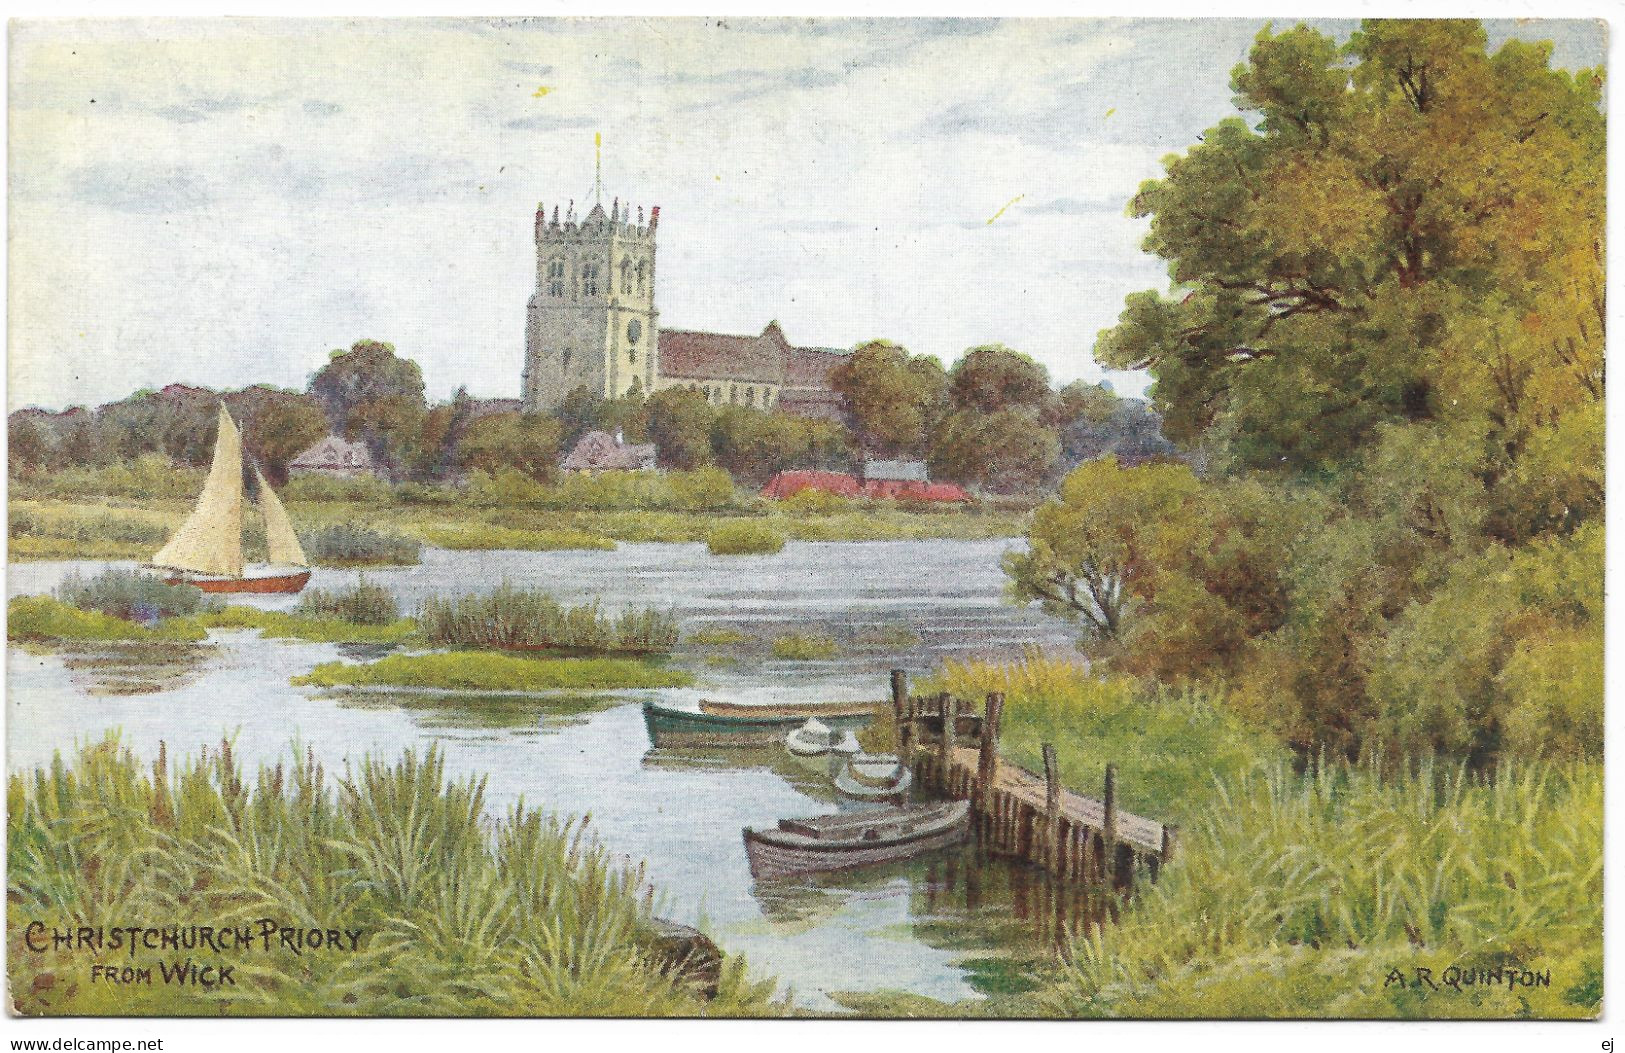 Christchurch Priory From Wick - A R Quinton - Salmon 1655 - Unused - Quinton, AR